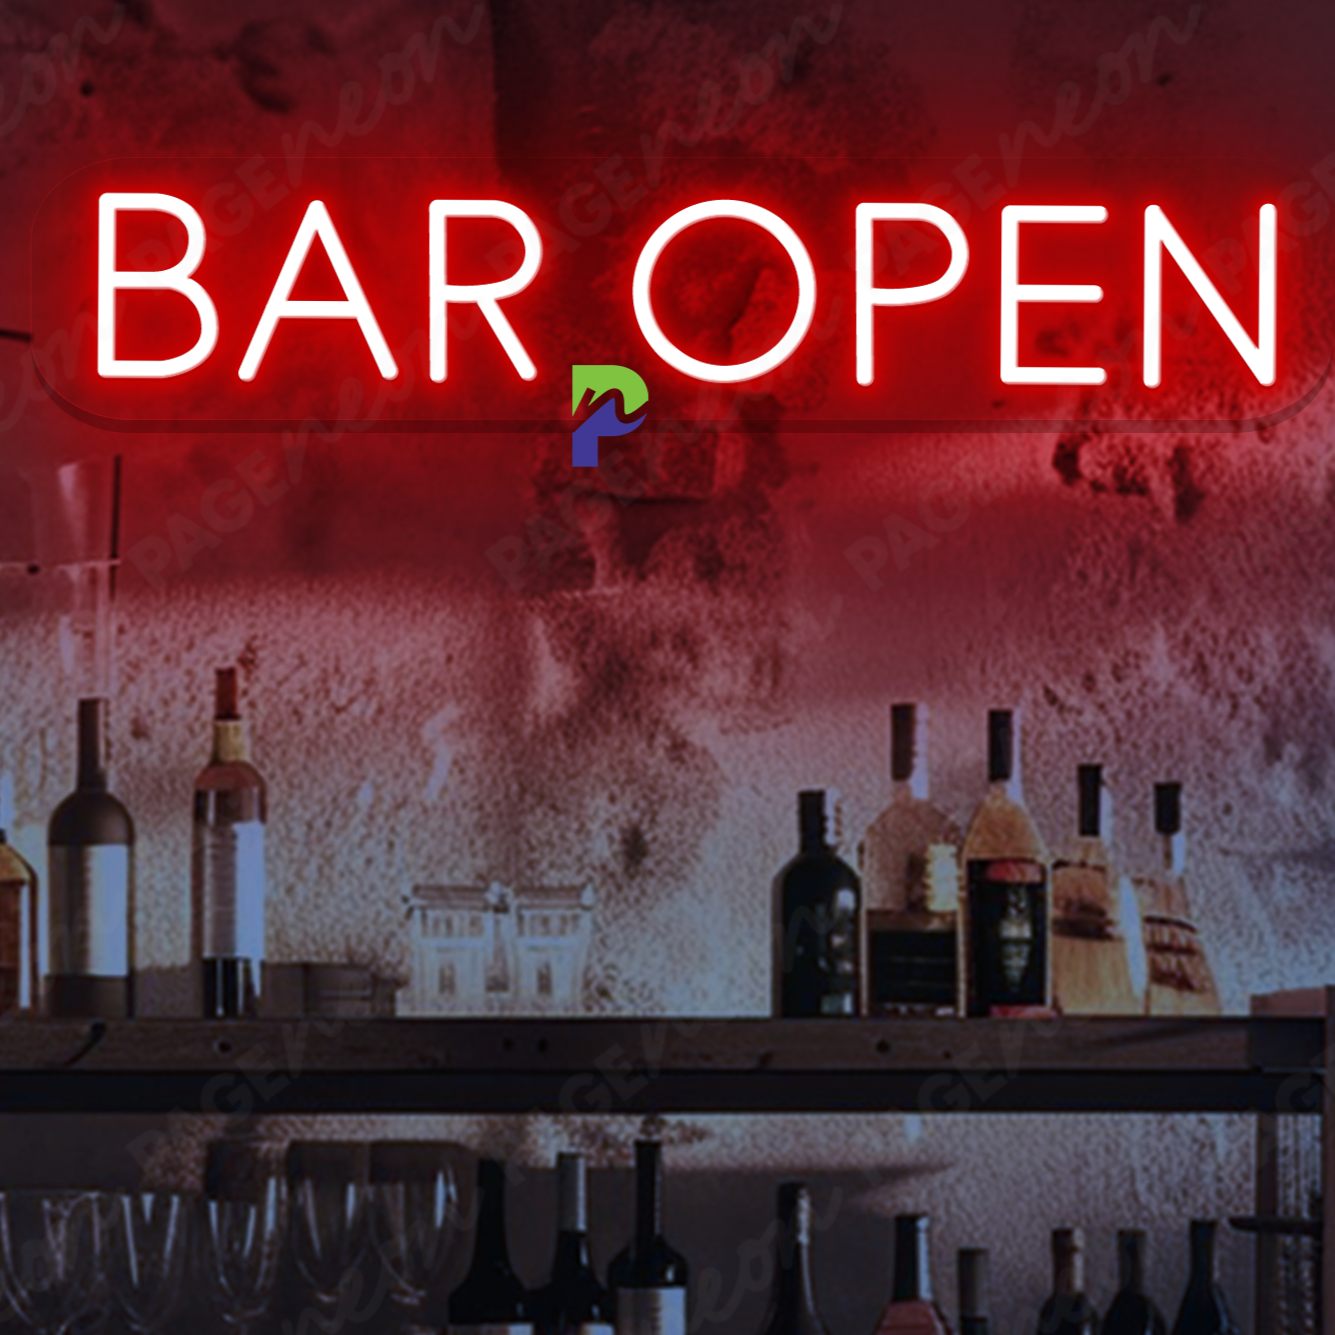 Bar Open Outdoor Neon Sign Typical Led Light